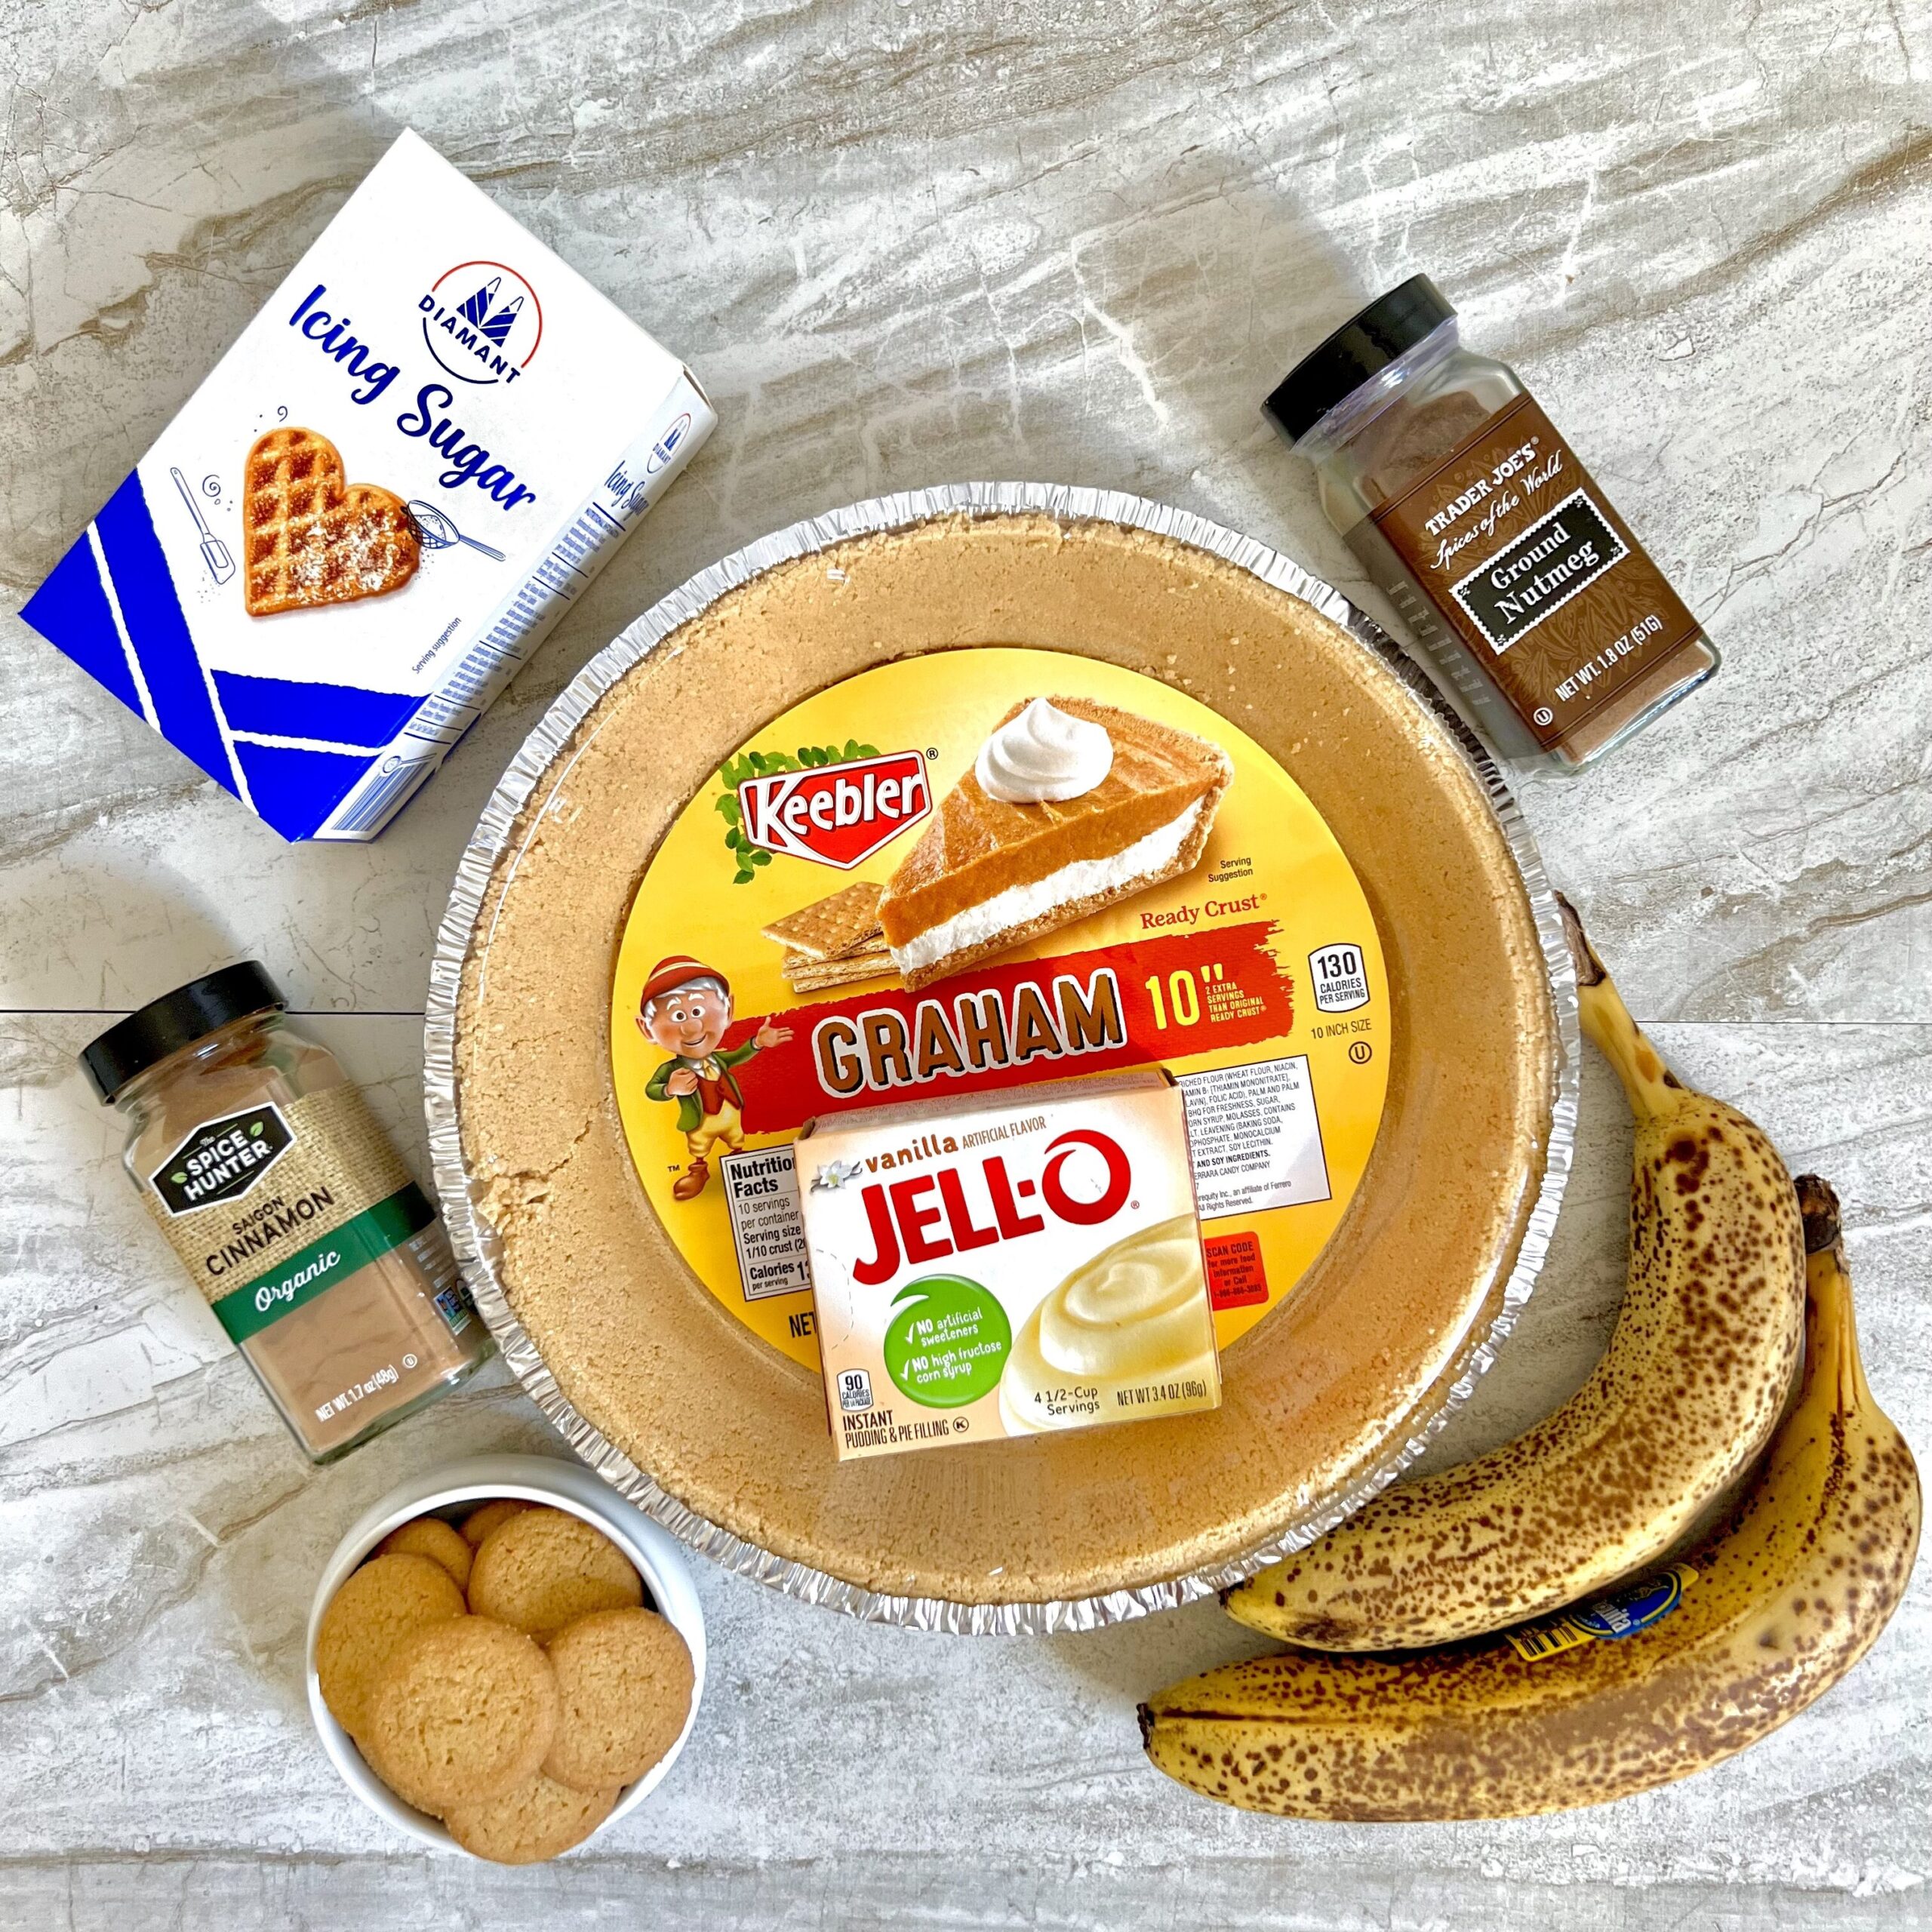 Banana Pudding Pie Ingredients (graham cracker crust in a pie tin with a plastic labeled cover, a box of Jell-o vanilla instant pudding inside the pie crust. The pie crust is surrounded by a bottle of nutmeg, two very ripe bananas, a small bowl of Nila wafers, a bottle of cinnamon and a box of icing sugar.